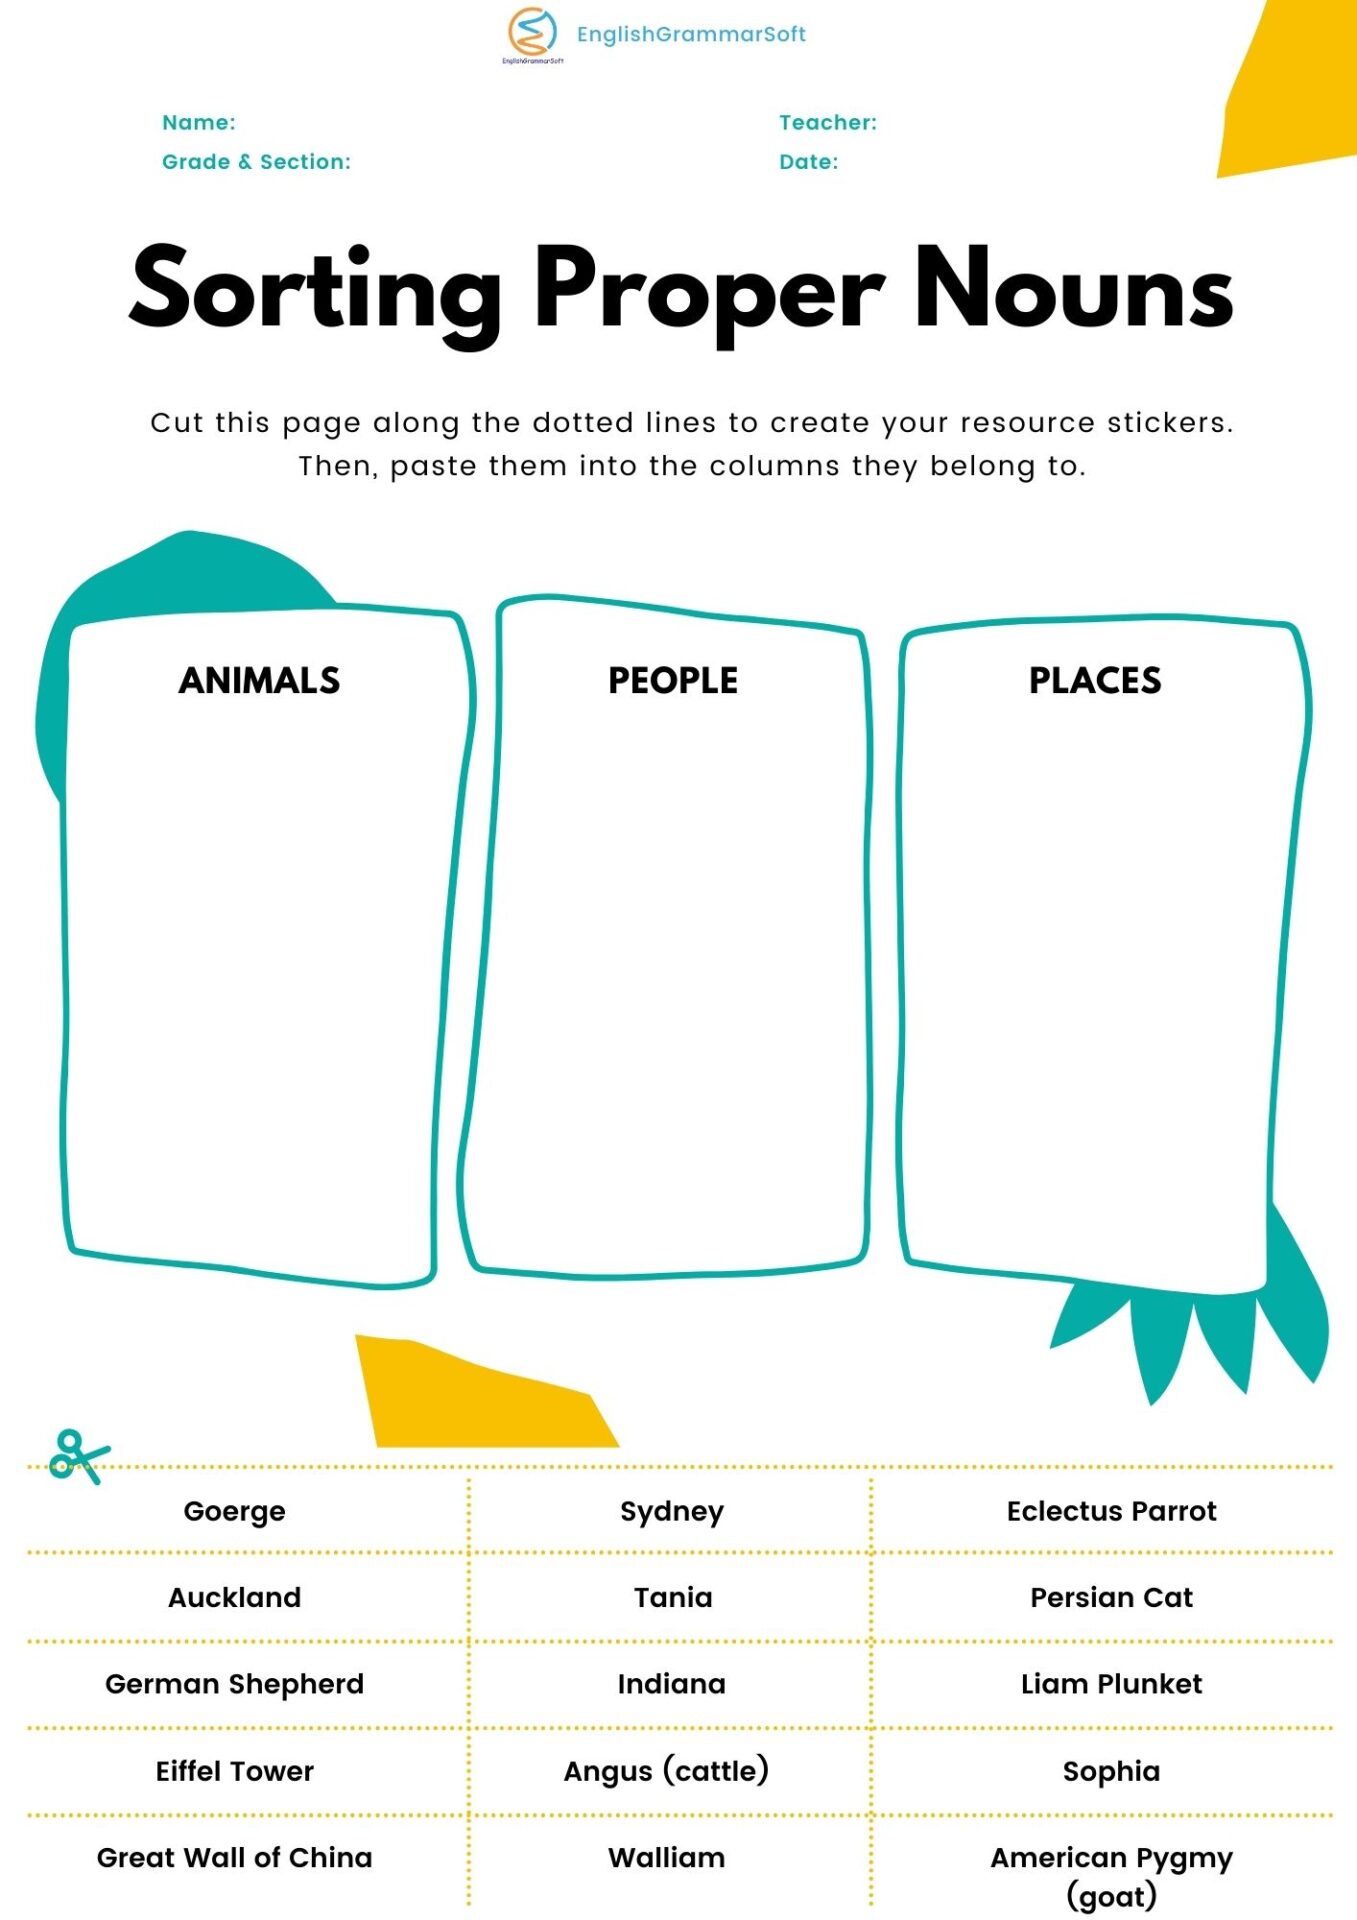 Proper Noun Worksheets with Answers - EnglishGrammarSoft Pertaining To Types Of Nouns Worksheet